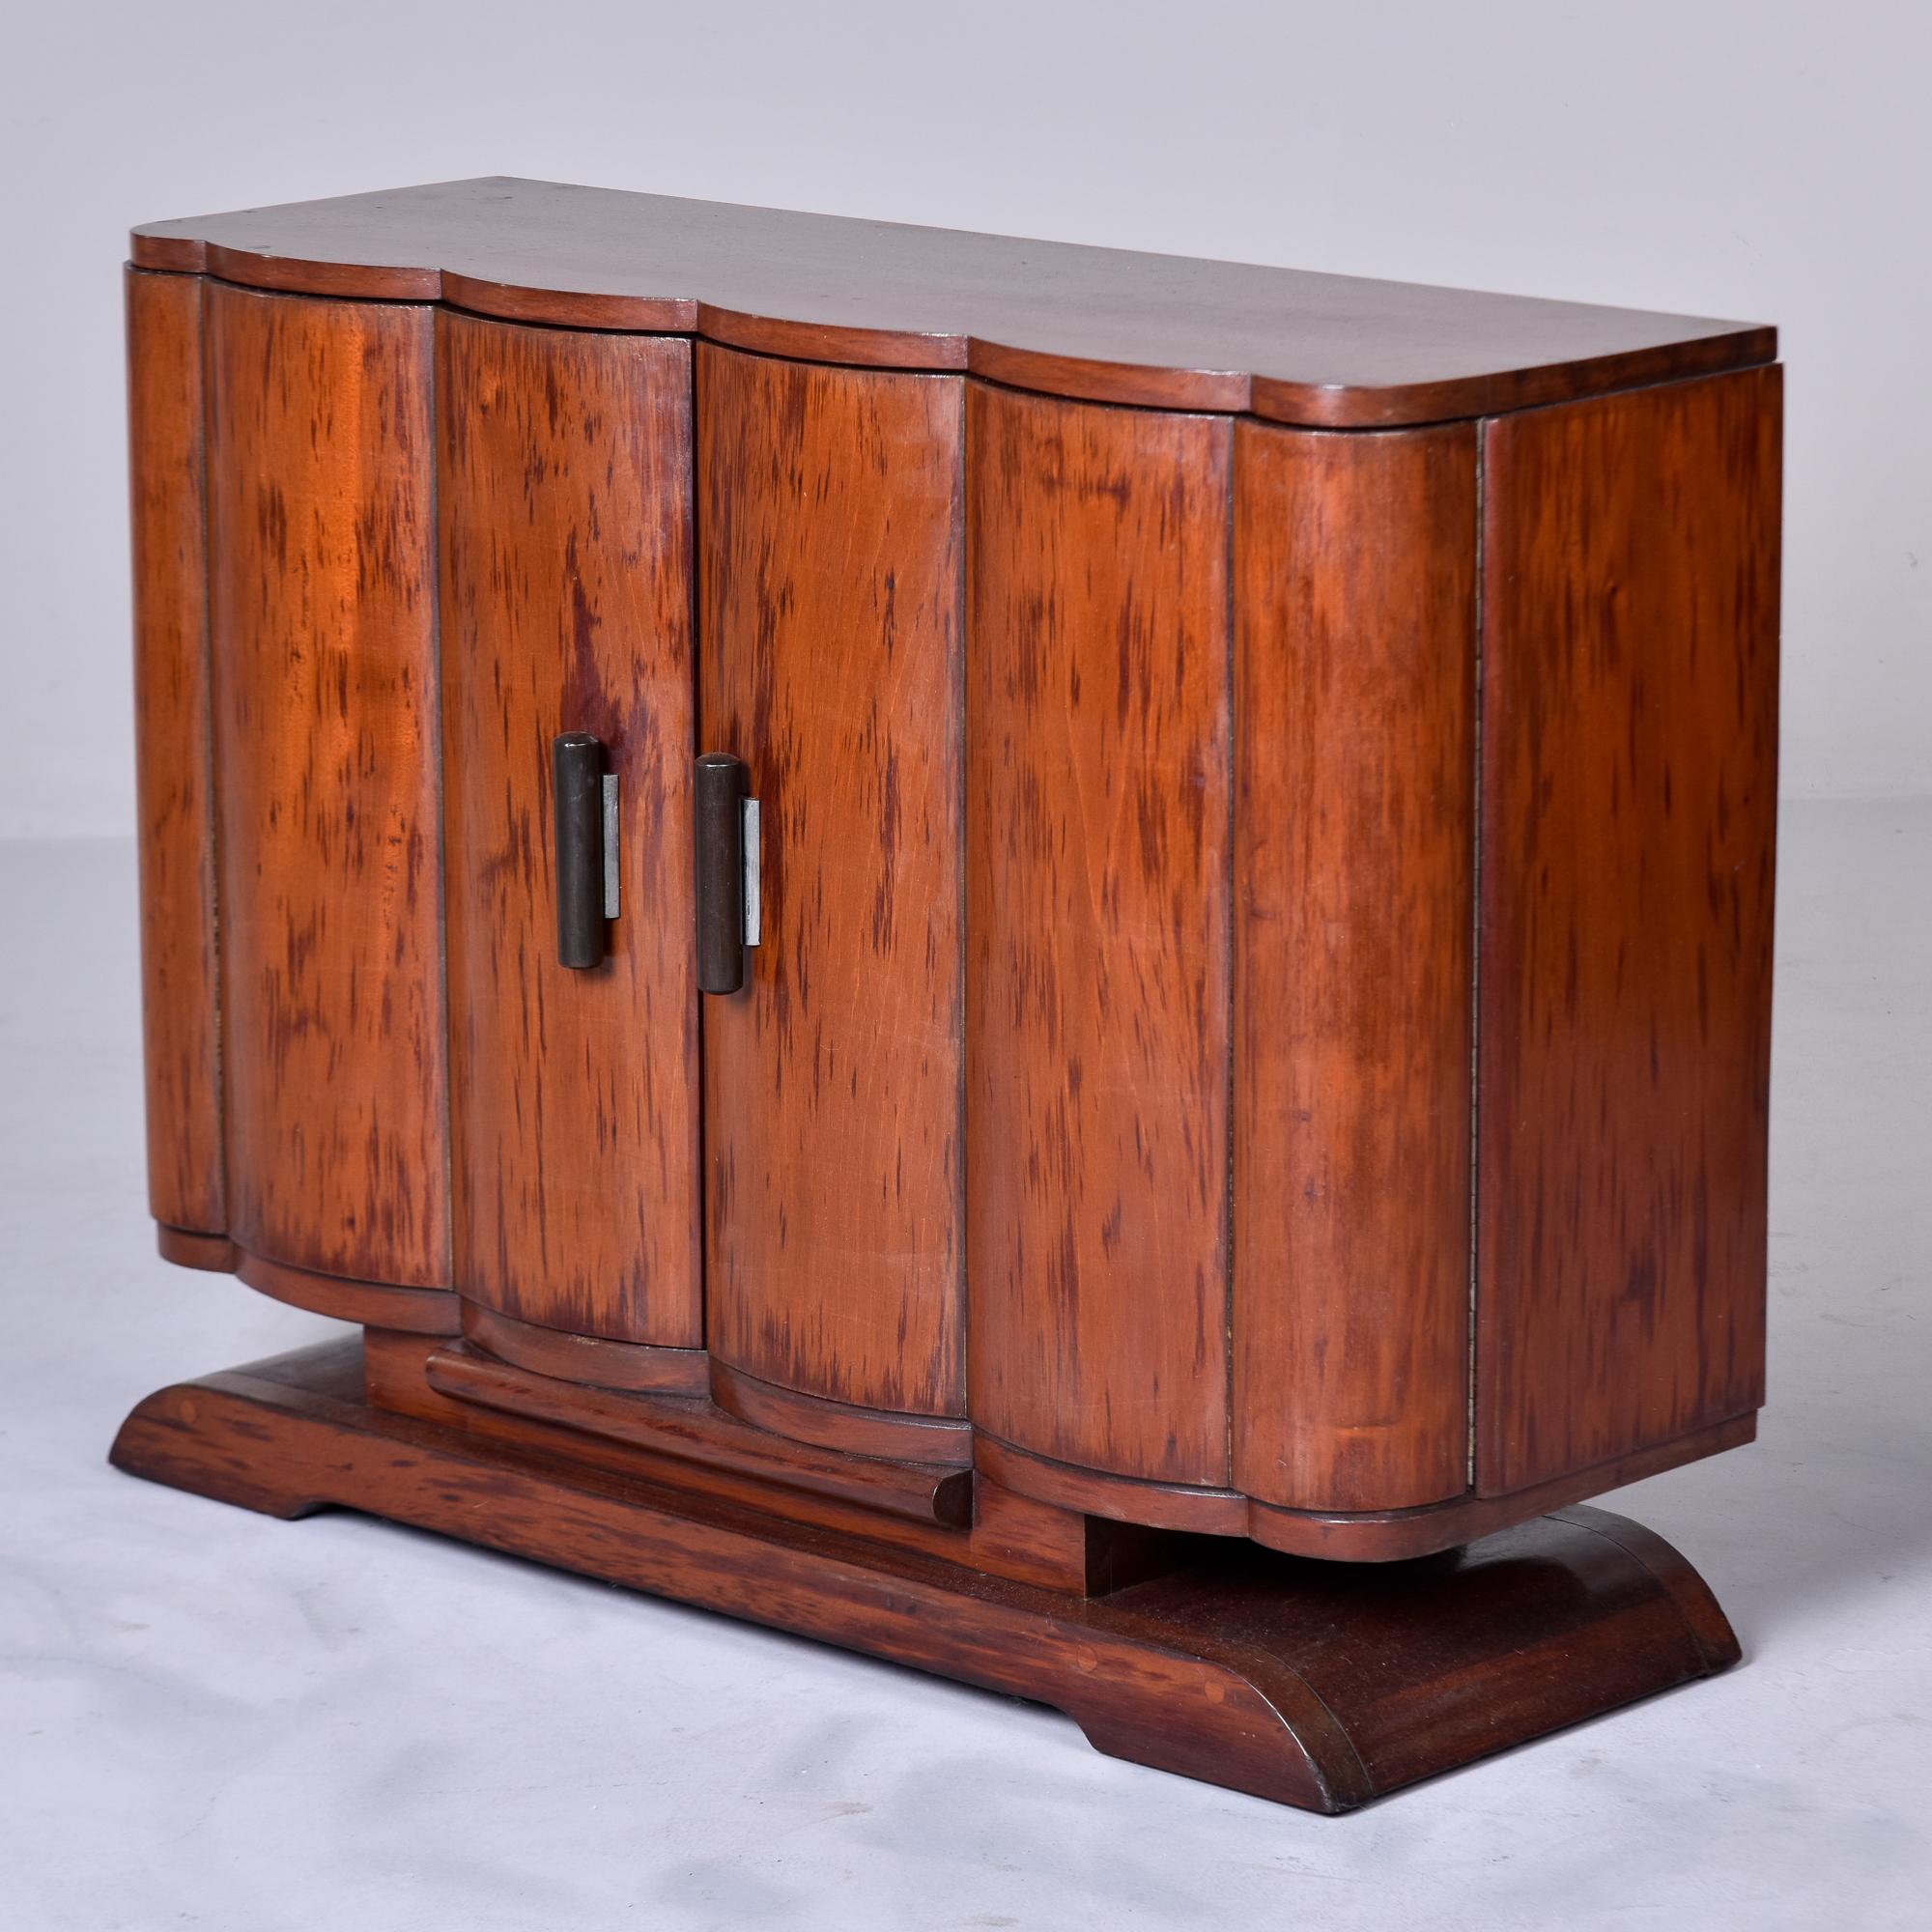 Found in France, this circa 1940s small Art Deco bar or buffet features a curvy pedestal base with a storage compartment. Two doors have curved fronts and open to a compartment with a single, fixed shelf. Previous owner cut out circles from back